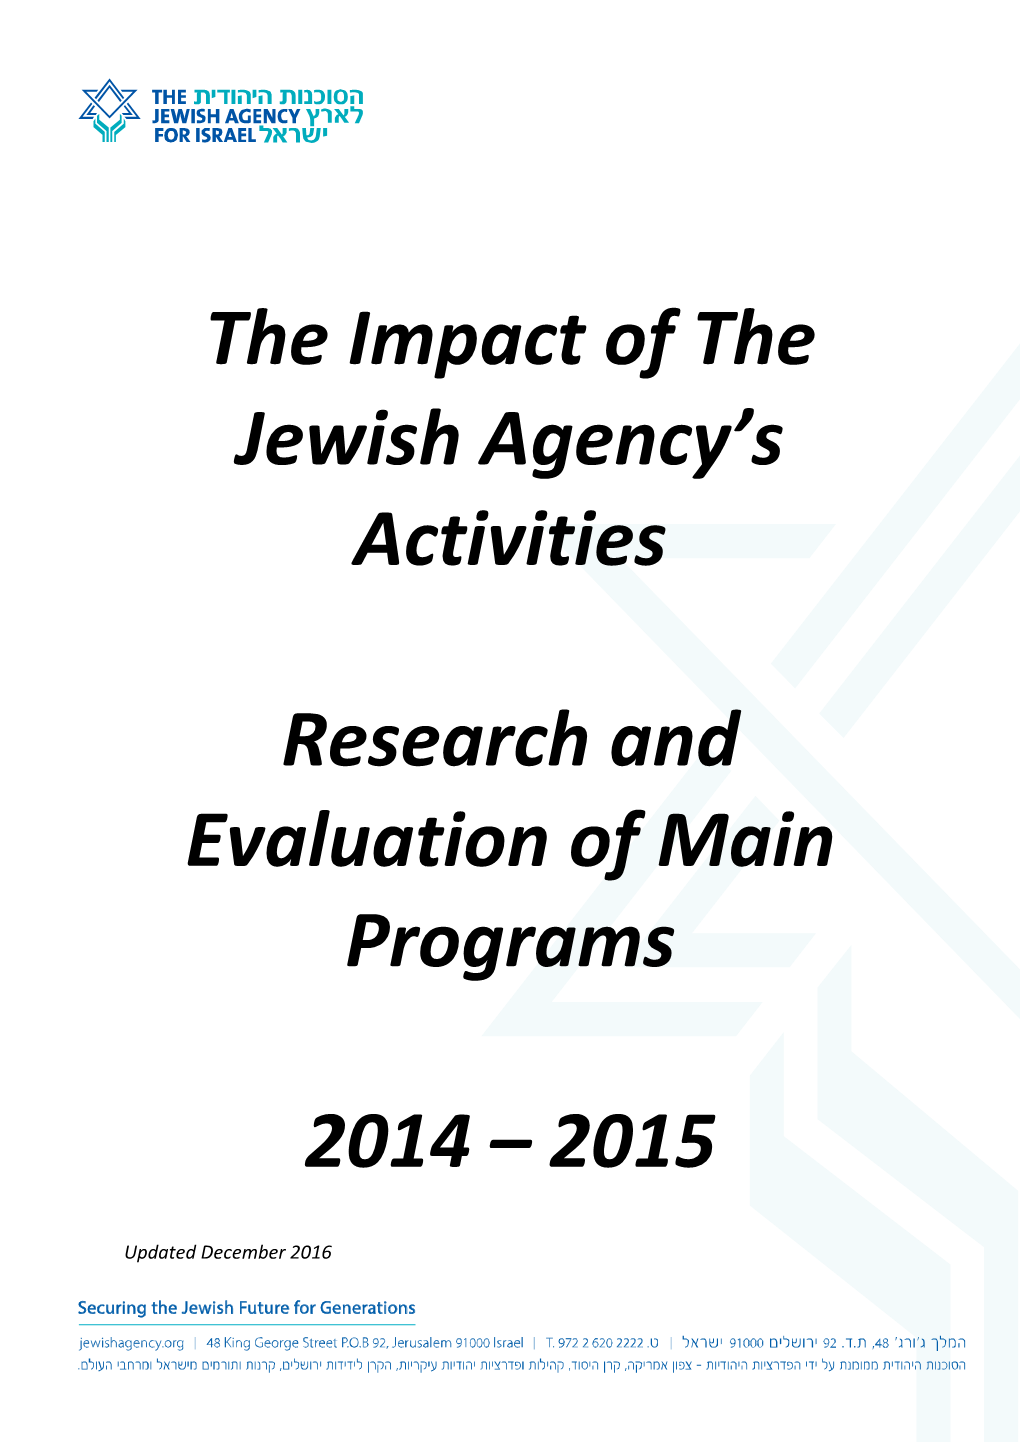 The Impact of the Jewish Agency's Activities Research and Evaluation